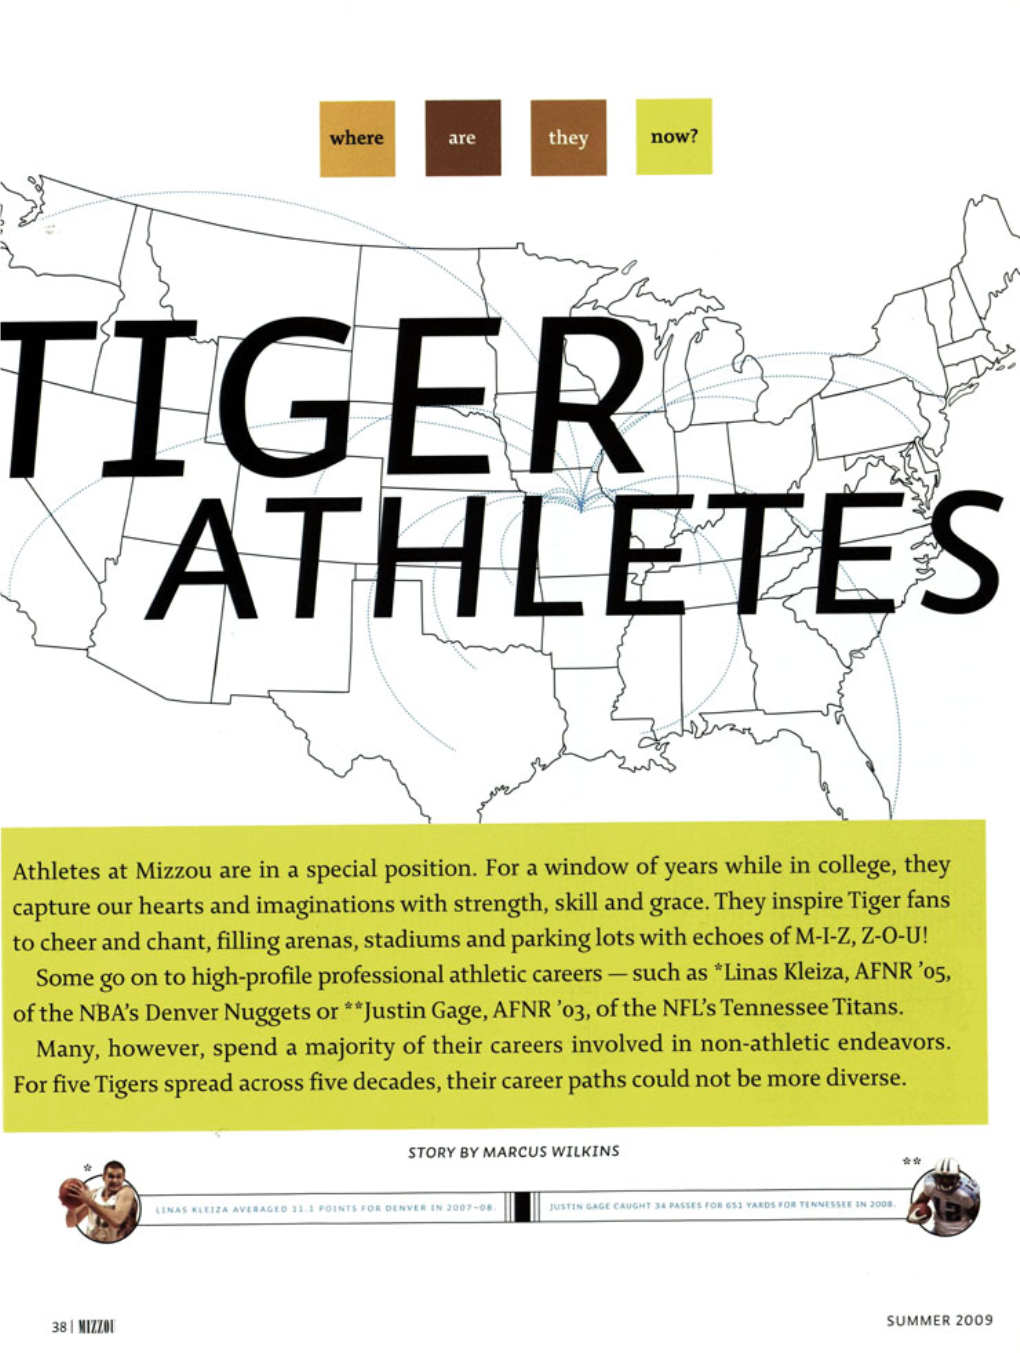 Athletes at Mizzou Are in a Special Position. for a Window of Years While in College, They Capture Our Hearts and Imaginations with Strength, Skill and Grace